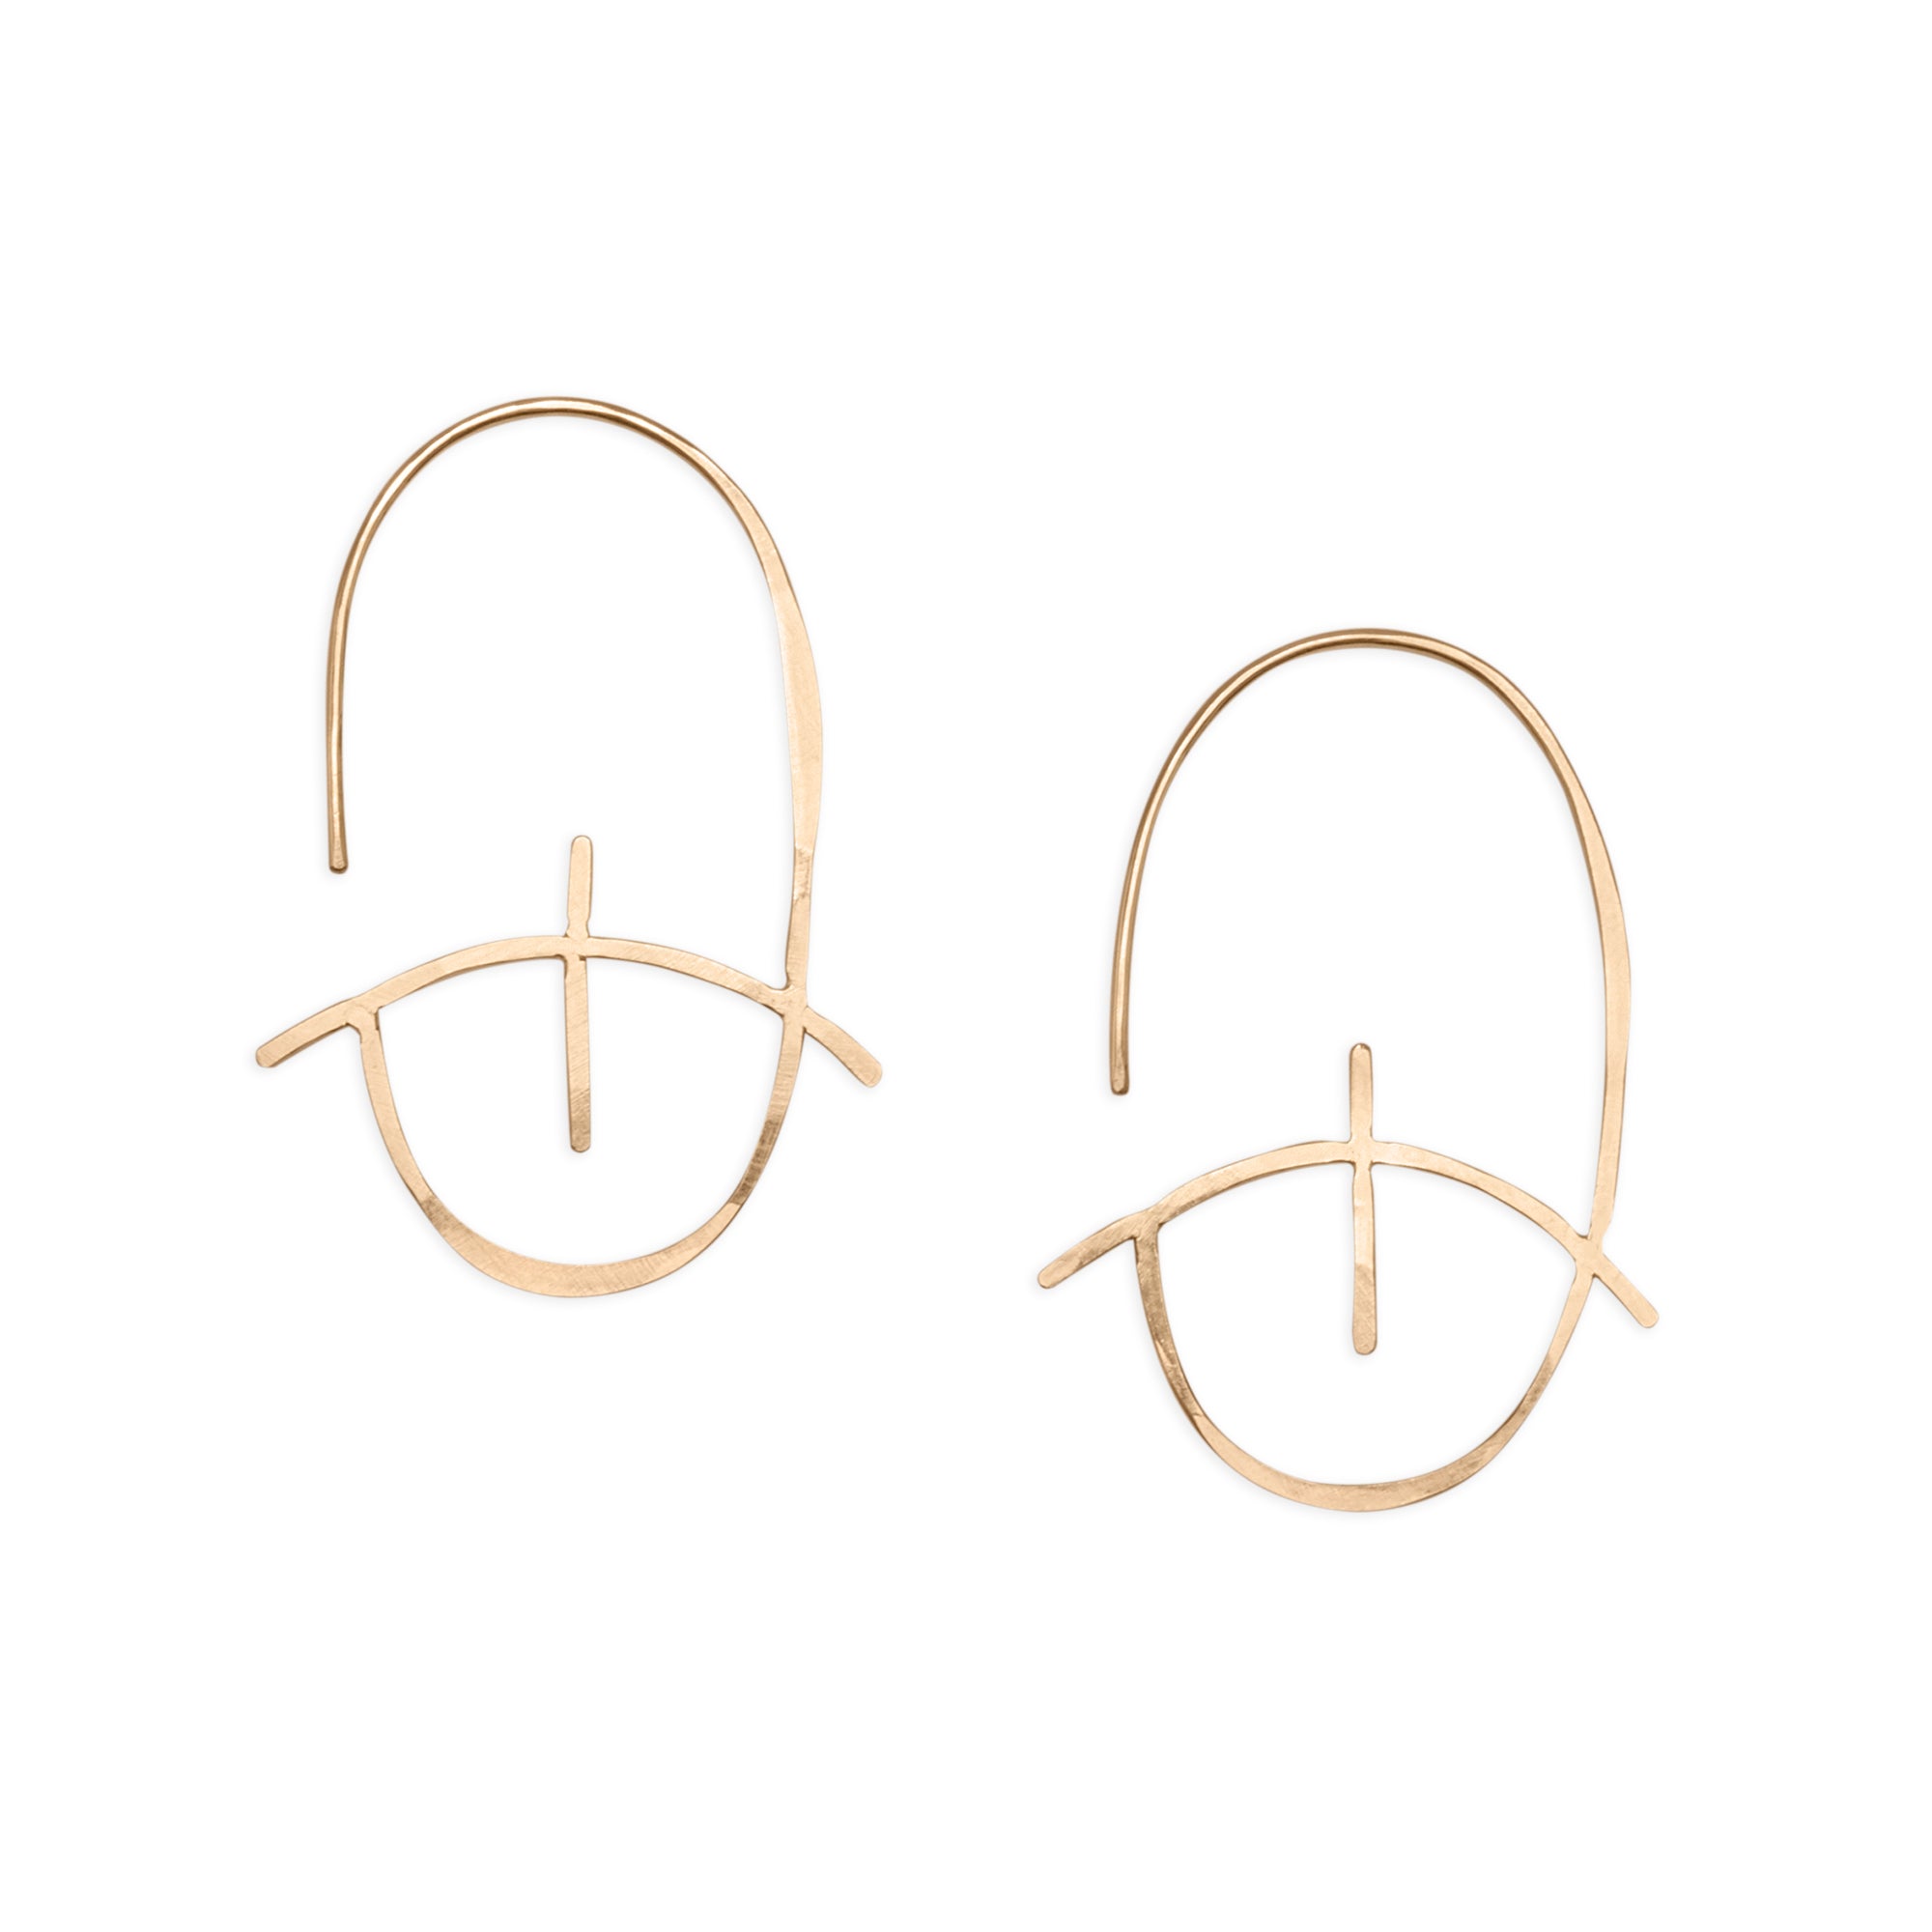 A modern take on the classic hoop, our 14k gold Altar Hoop features an oval shape with a chic arch design on the inside